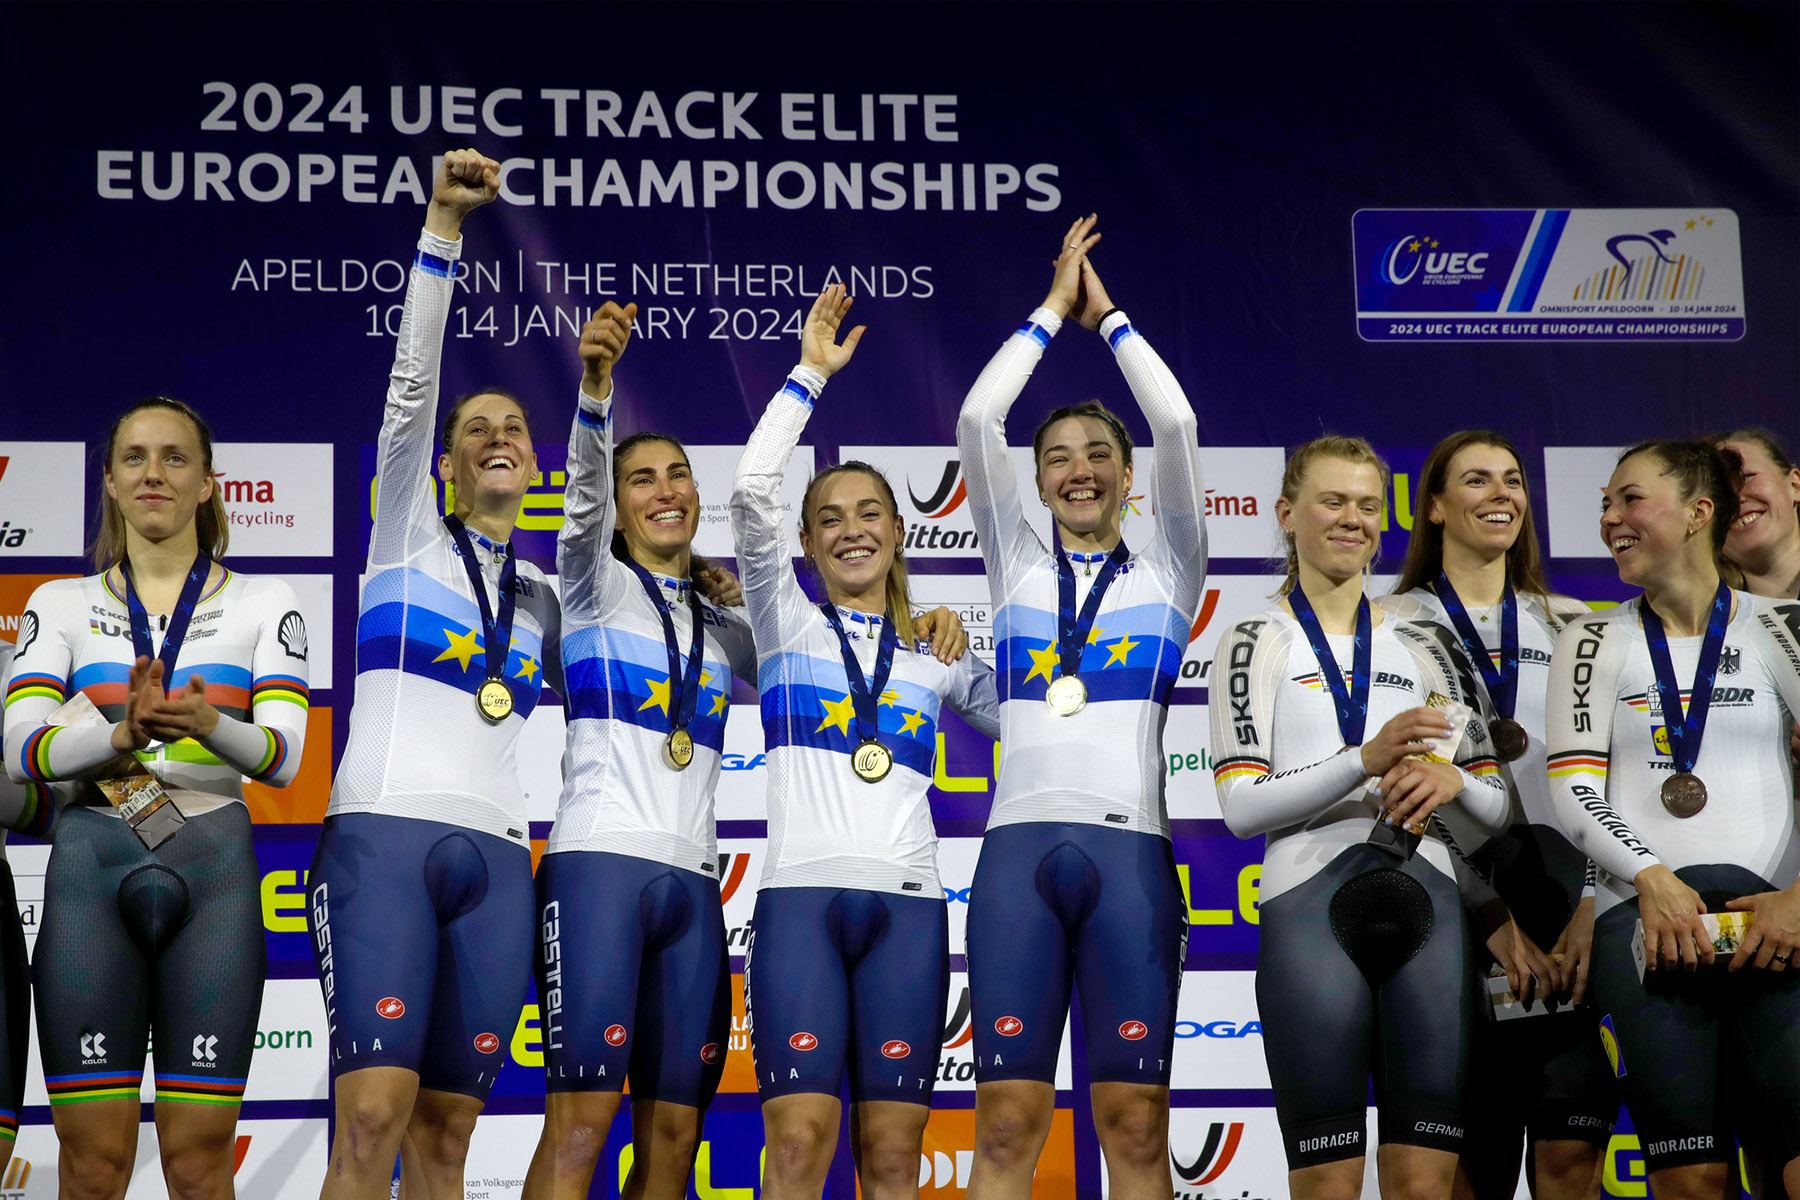 The Italian National Team triumphs at the 2024 European Track Championships